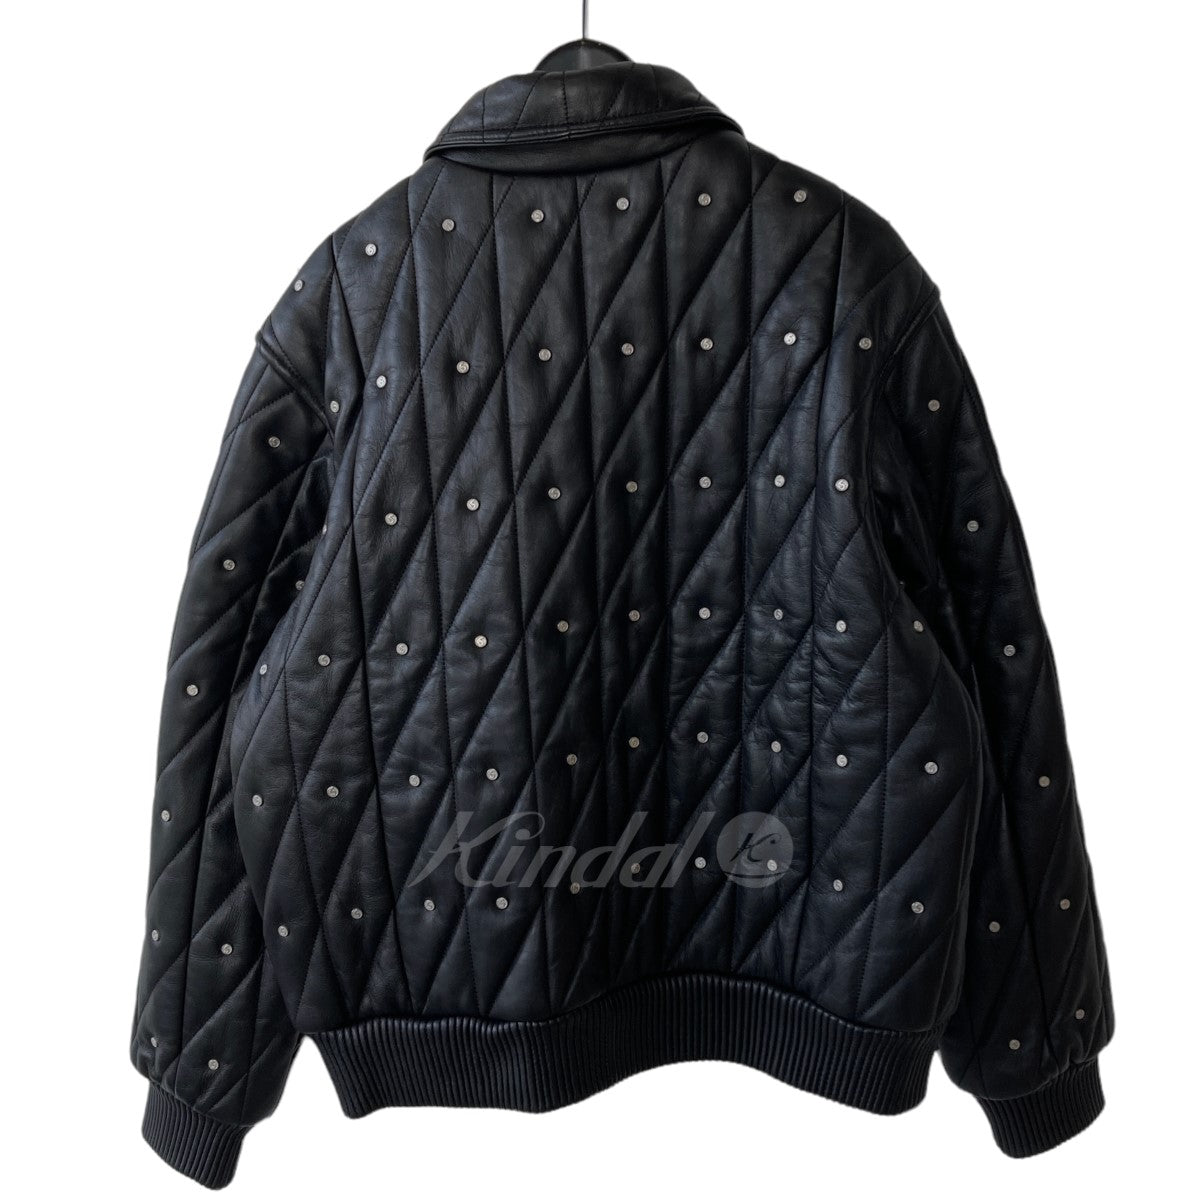 SUPREME(シュプリーム) 18AW Quilted Studded Leather Jacket レザージャケット